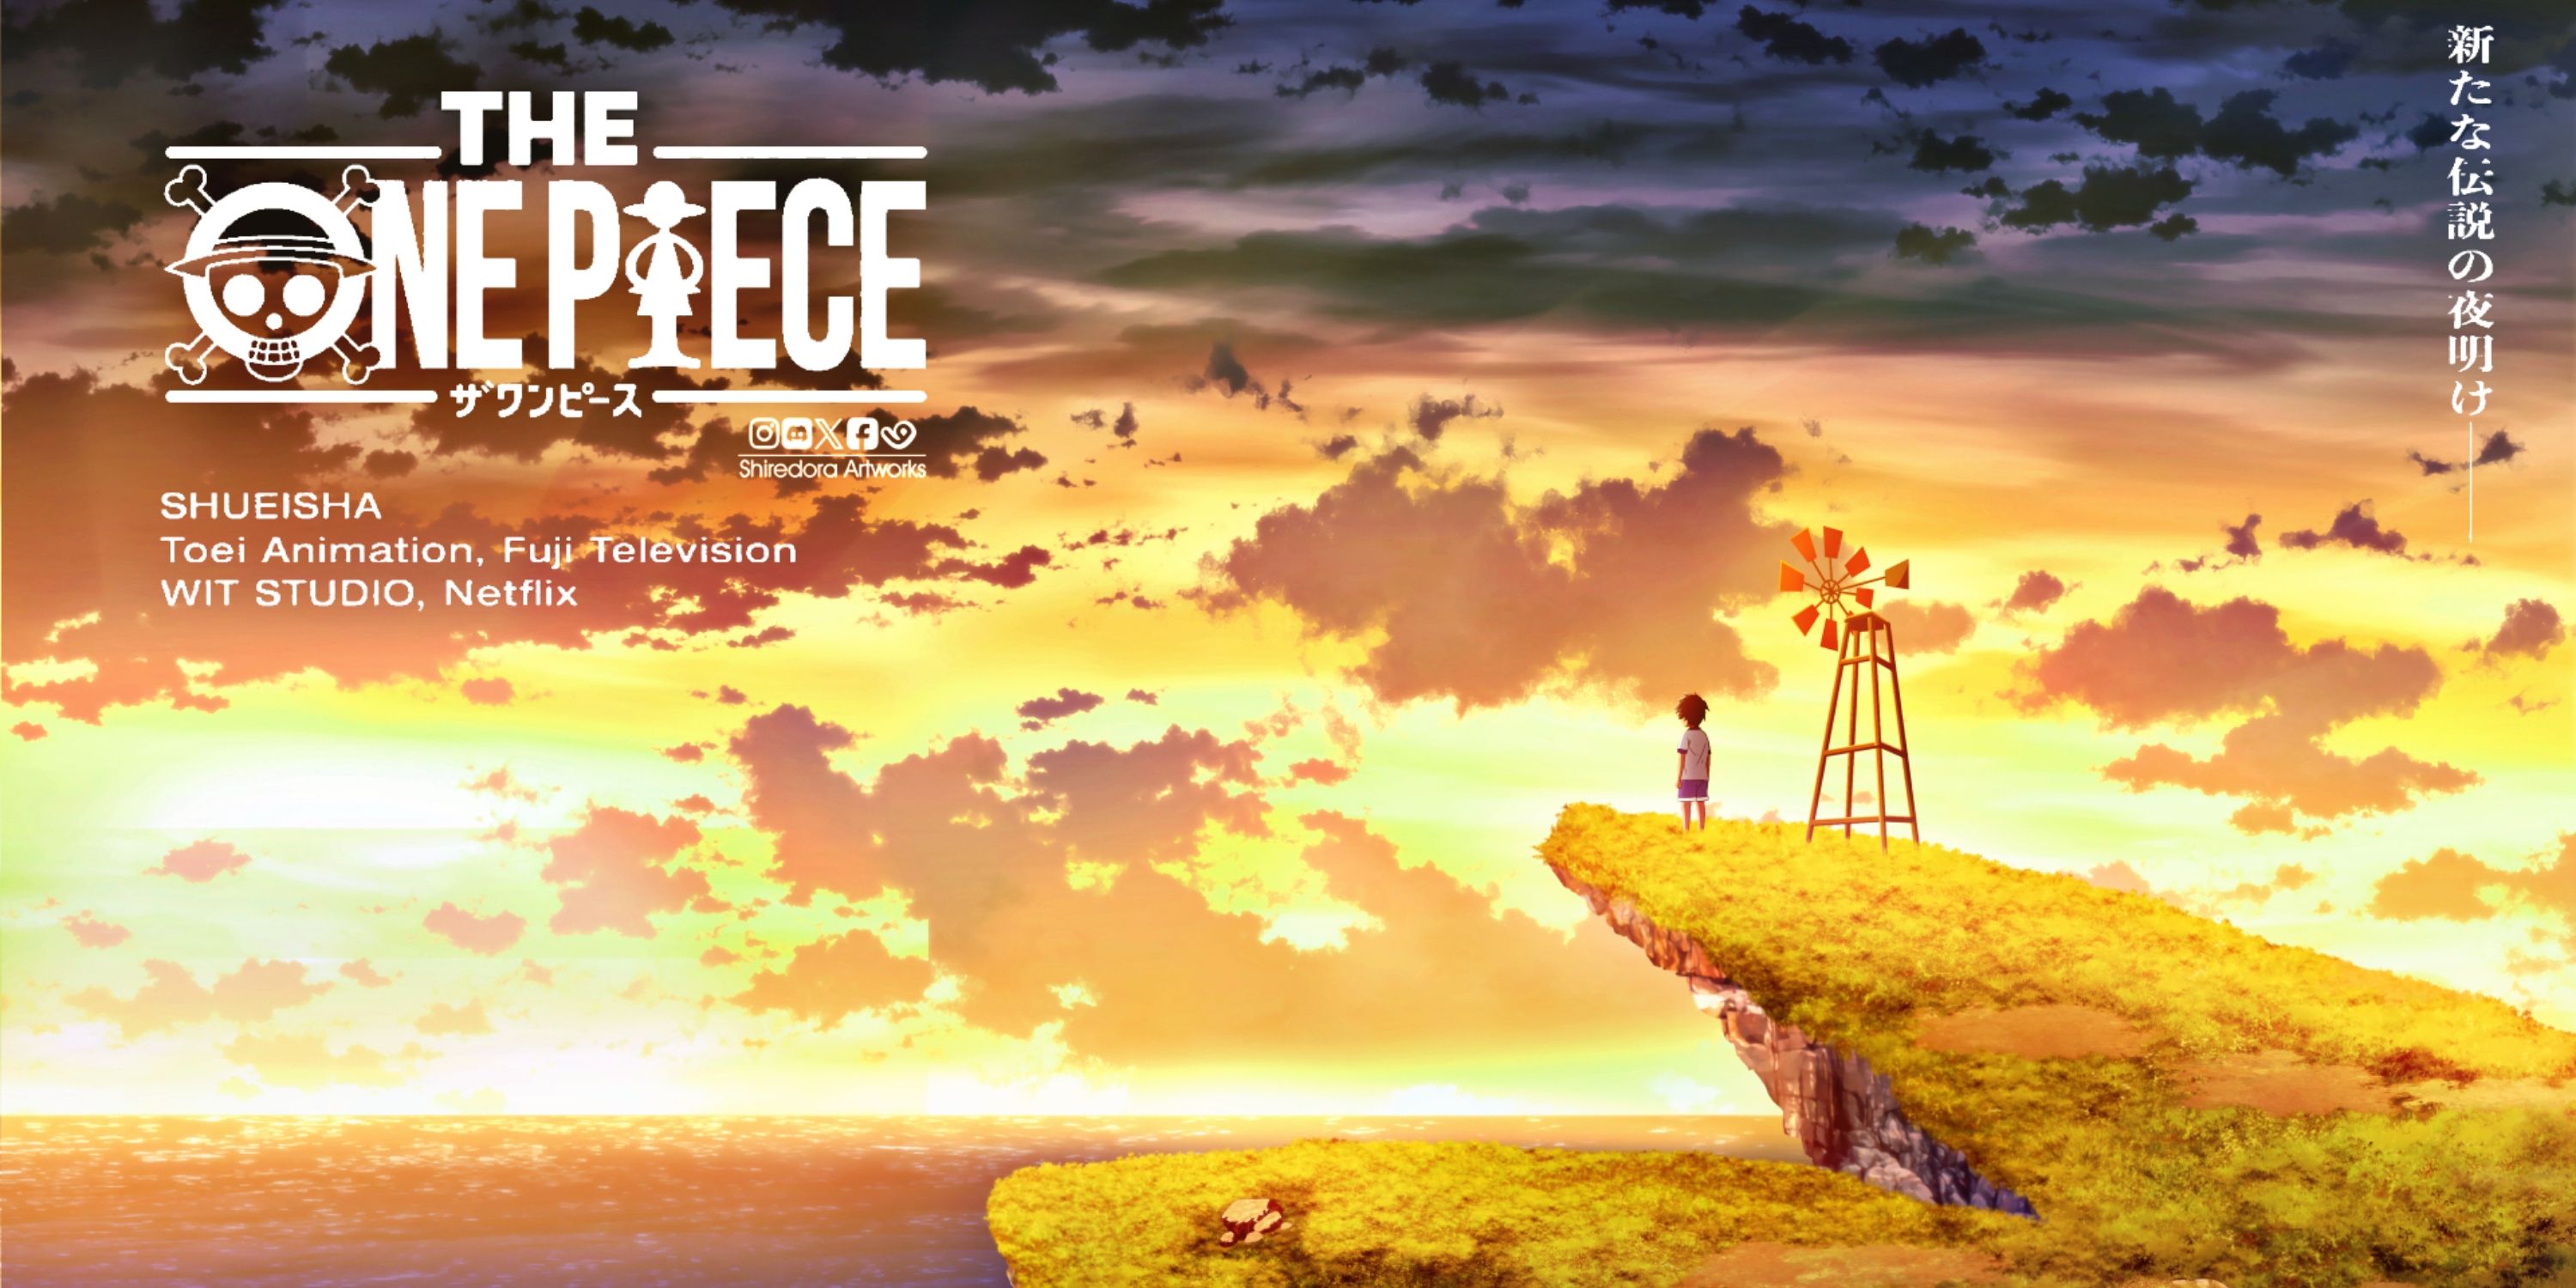 ONE PIECE TV Anime is officially getting an anime adaptation remake titled  'THE ONE PIECE' by WIT Studio and Netflix. : r/anime